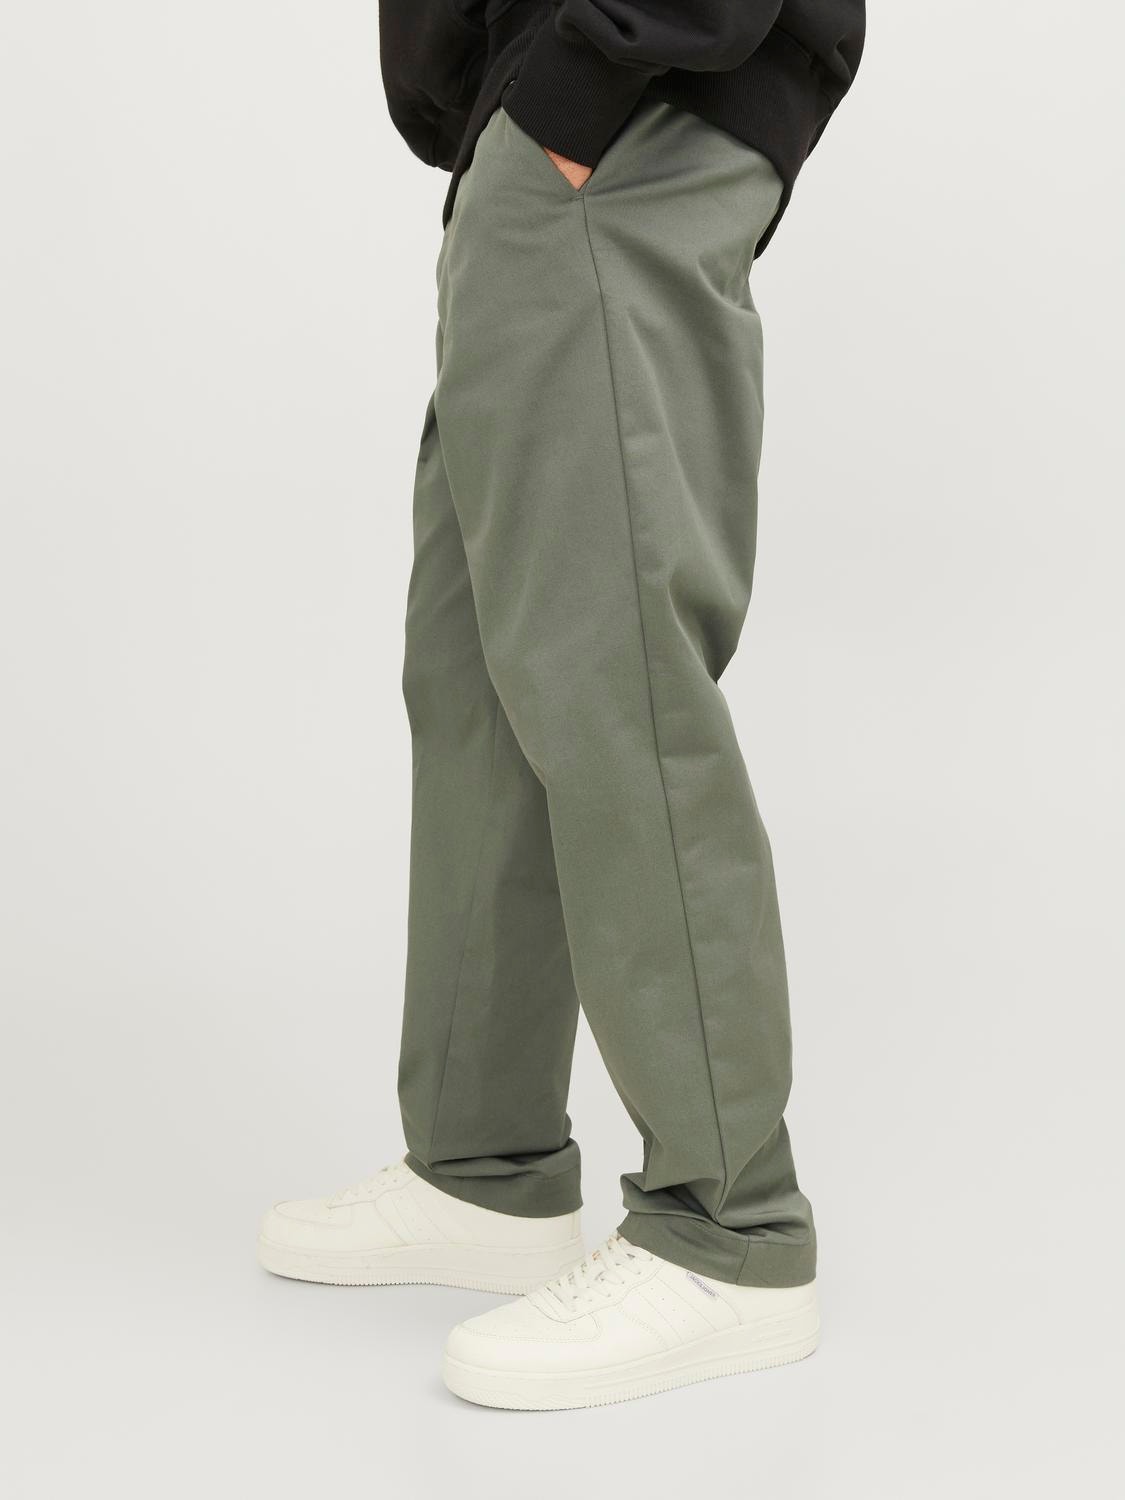 Jack & Jones Relaxed Fit Chinos -Agave Green - 12253083